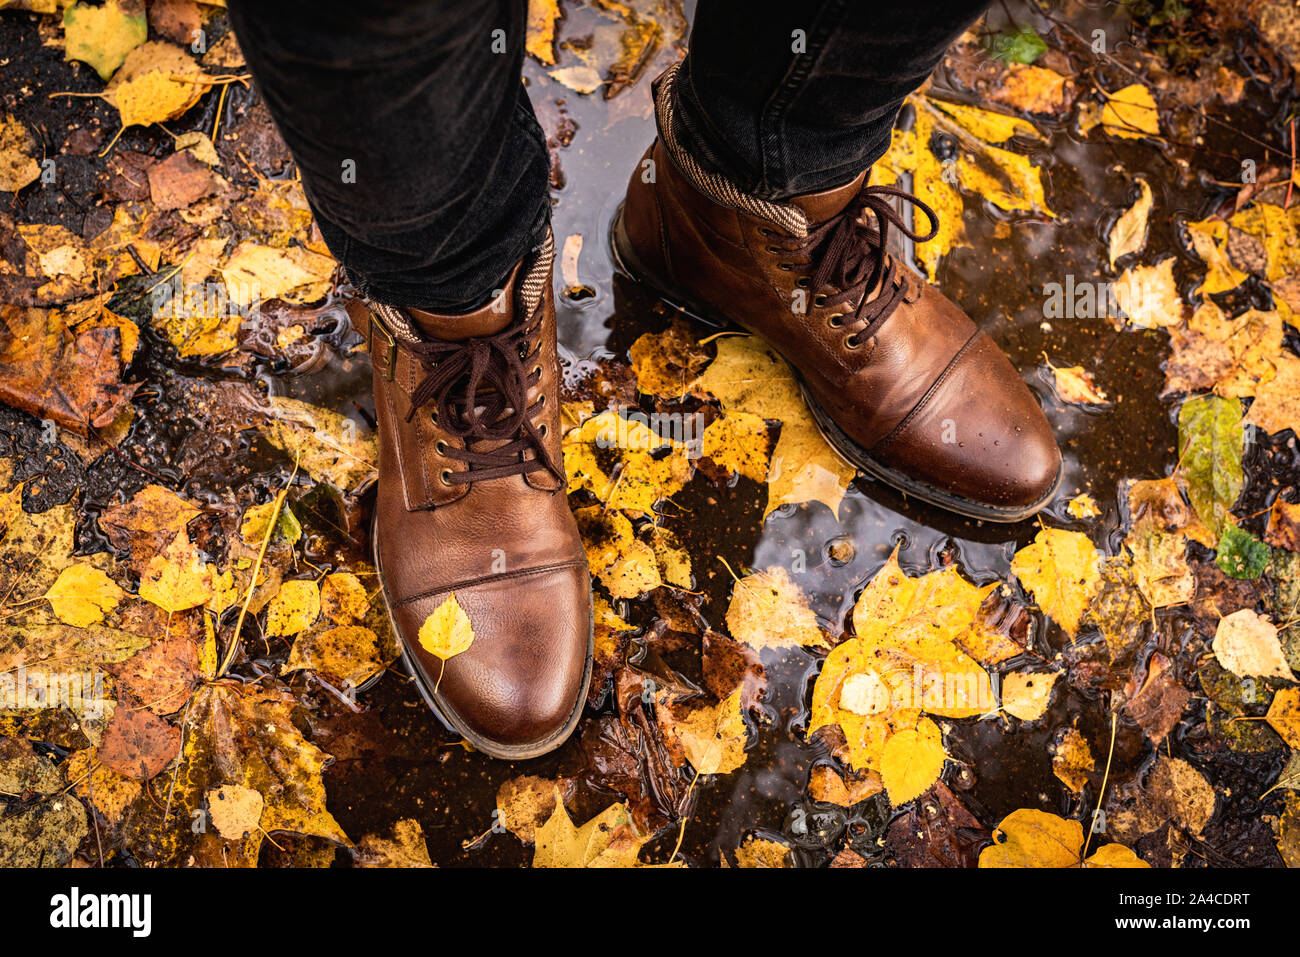 Girl In Leather Boots High Resolution Stock Photography and Images - Alamy